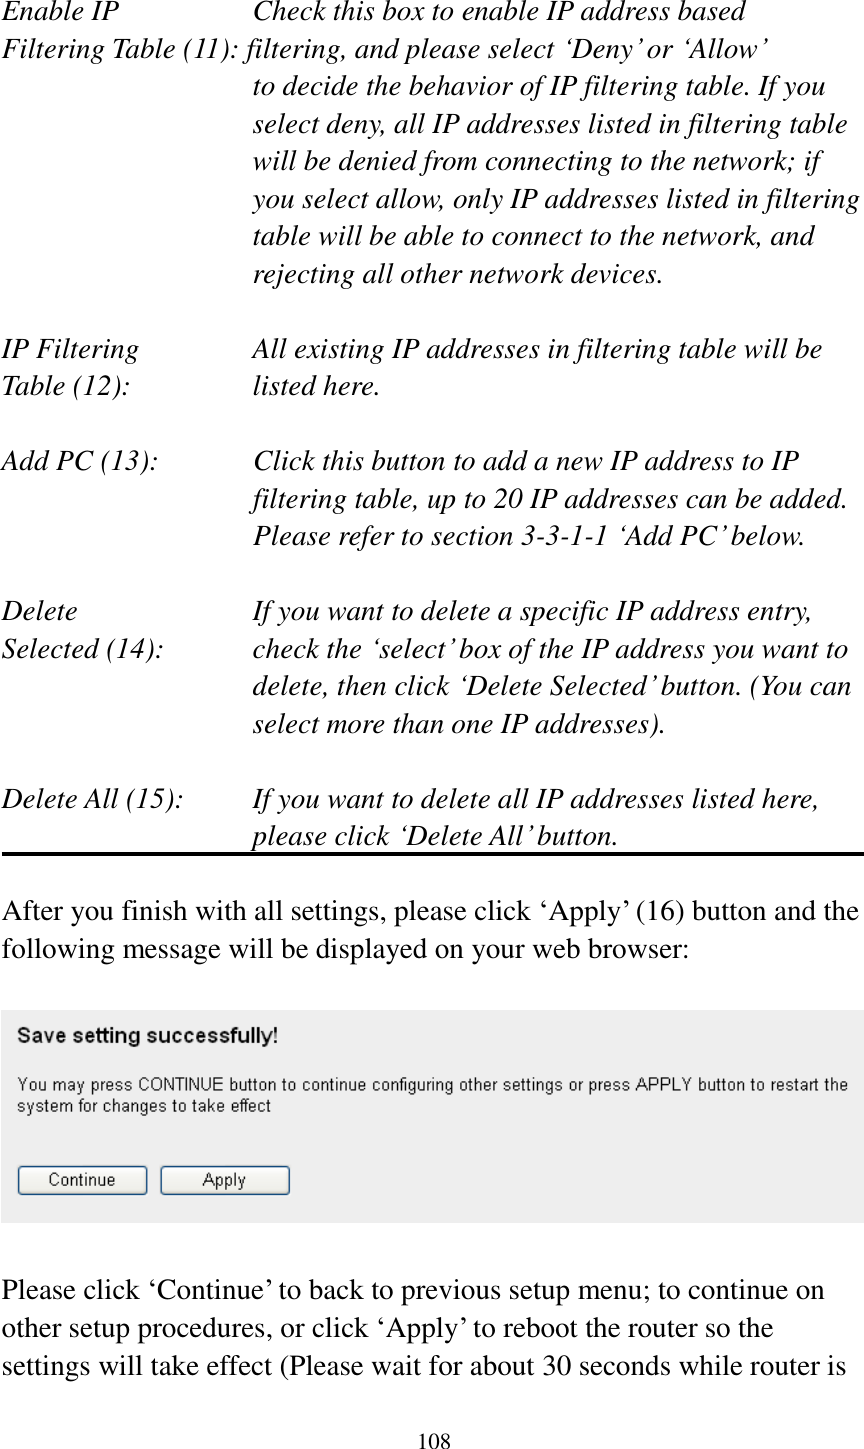 108  Enable IP        Check this box to enable IP address based Filtering Table (11): filtering, and please select „Deny‟ or „Allow‟   to decide the behavior of IP filtering table. If you select deny, all IP addresses listed in filtering table will be denied from connecting to the network; if you select allow, only IP addresses listed in filtering table will be able to connect to the network, and rejecting all other network devices.  IP Filtering      All existing IP addresses in filtering table will be Table (12):       listed here.  Add PC (13):    Click this button to add a new IP address to IP filtering table, up to 20 IP addresses can be added.   Please refer to section 3-3-1-1 „Add PC‟ below.    Delete         If you want to delete a specific IP address entry, Selected (14):    check the „select‟ box of the IP address you want to delete, then click „Delete Selected‟ button. (You can select more than one IP addresses).  Delete All (15):    If you want to delete all IP addresses listed here, please click „Delete All‟ button.  After you finish with all settings, please click „Apply‟ (16) button and the following message will be displayed on your web browser:    Please click „Continue‟ to back to previous setup menu; to continue on other setup procedures, or click „Apply‟ to reboot the router so the settings will take effect (Please wait for about 30 seconds while router is 